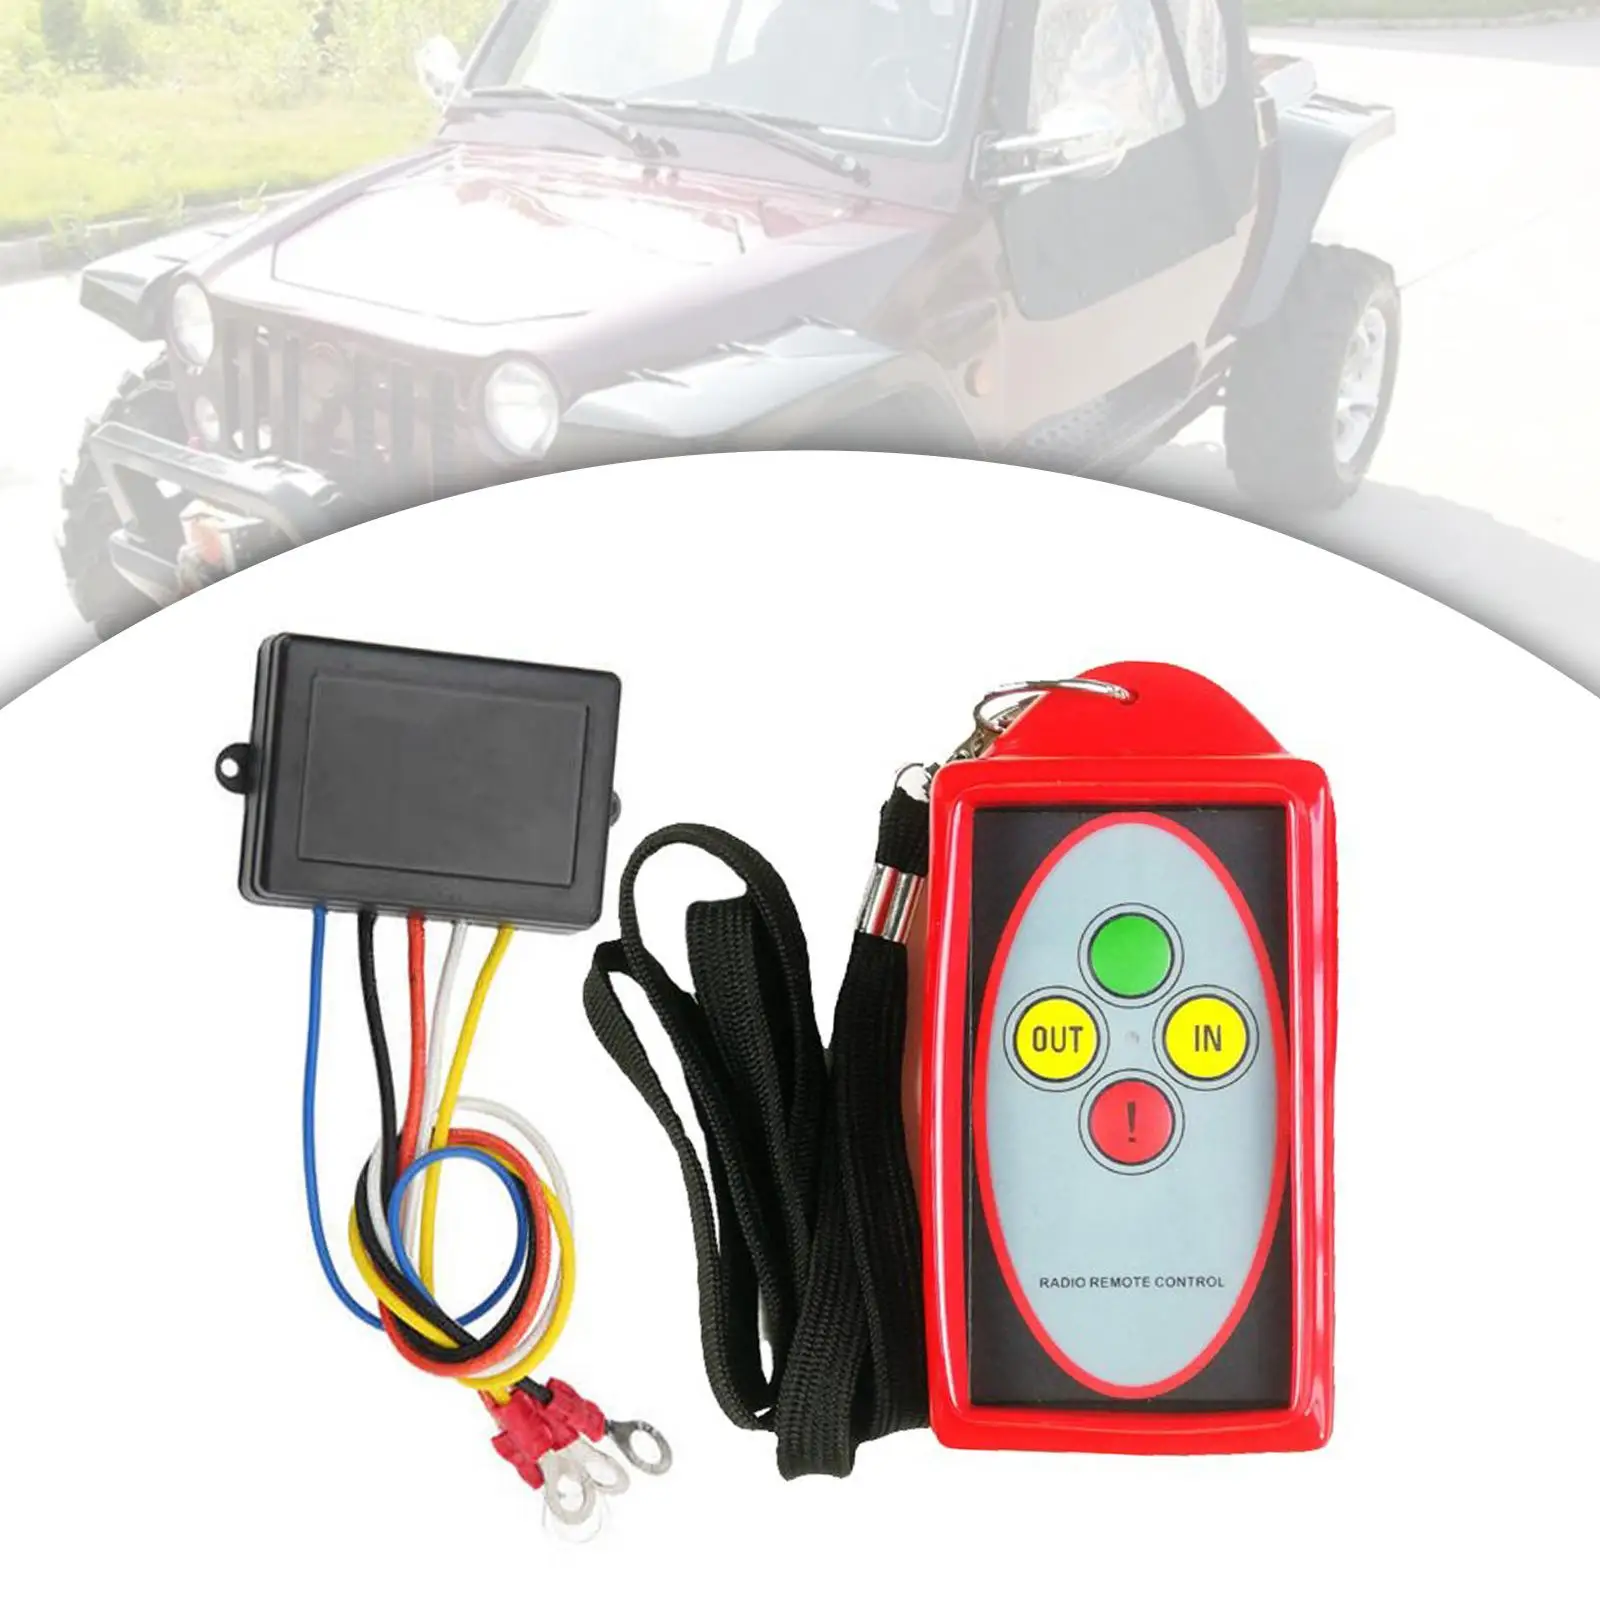 Wireless Winch Remote Control Kit Repair 75ft High Performance Durable Replaces Accessories for ATV Vehicle UTV SUV Truck